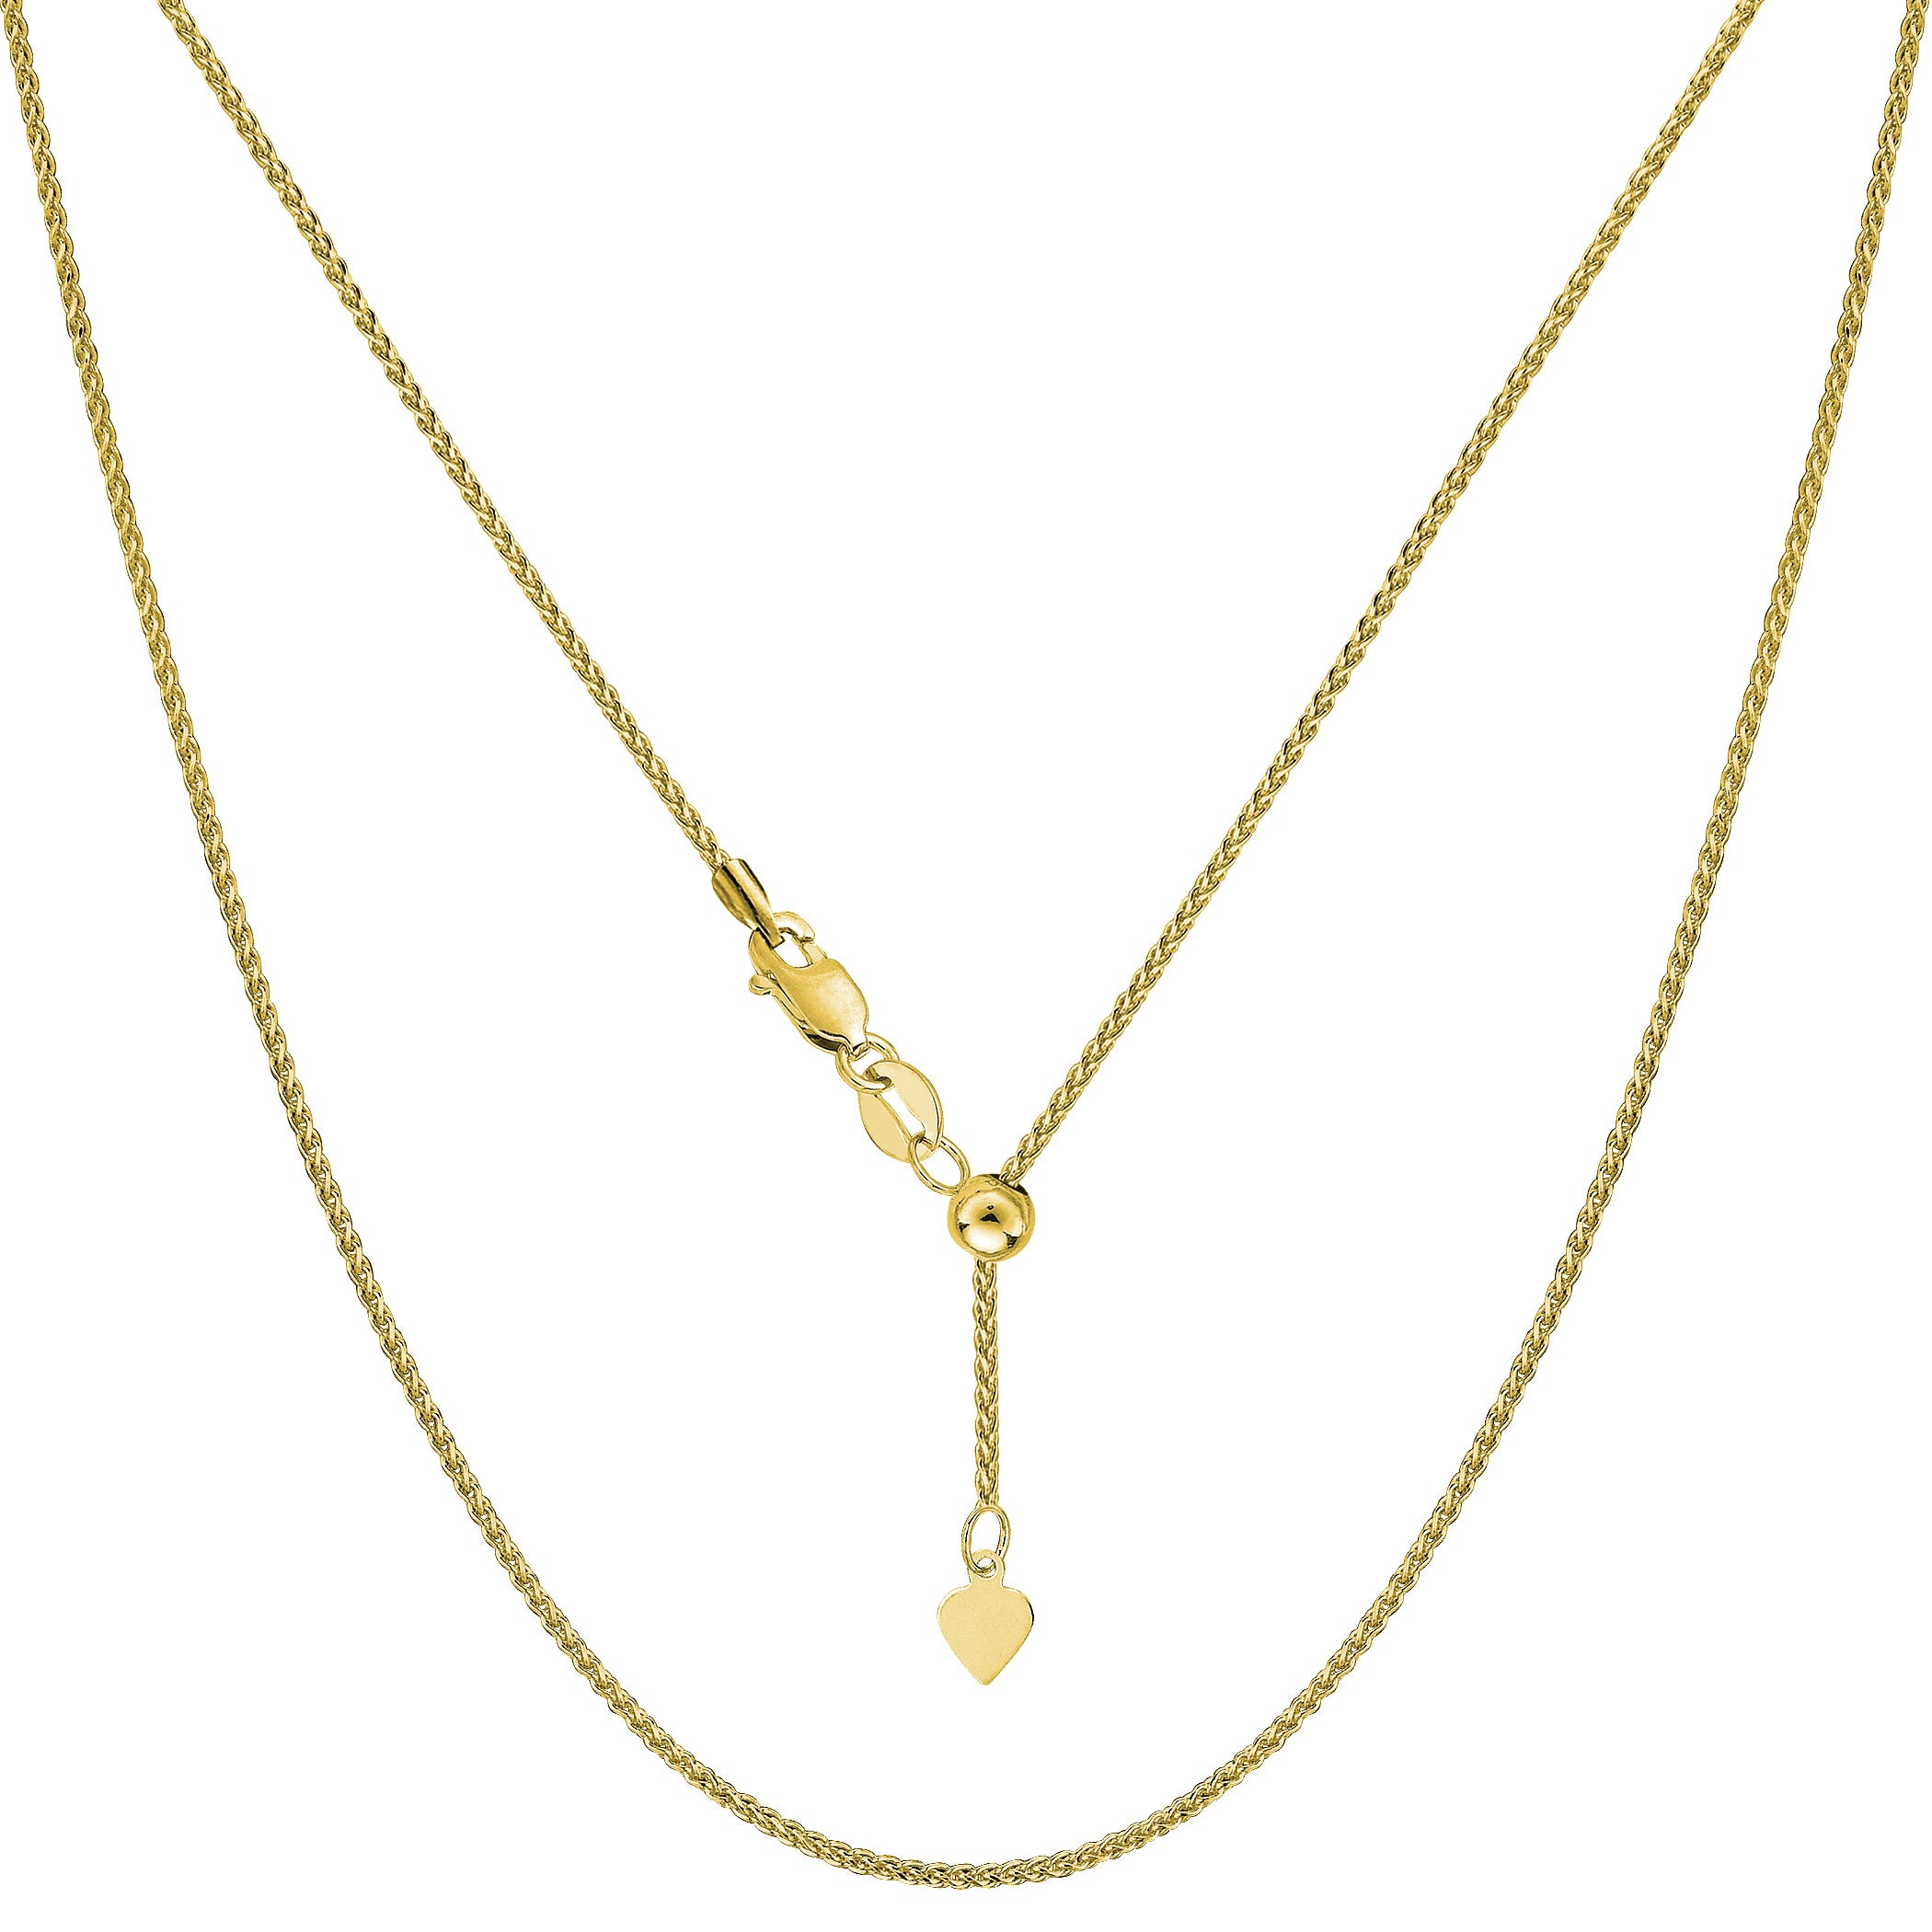 14k Yellow Gold Adjustable Wheat Chain Necklace, 1.0mm, 22" fine designer jewelry for men and women